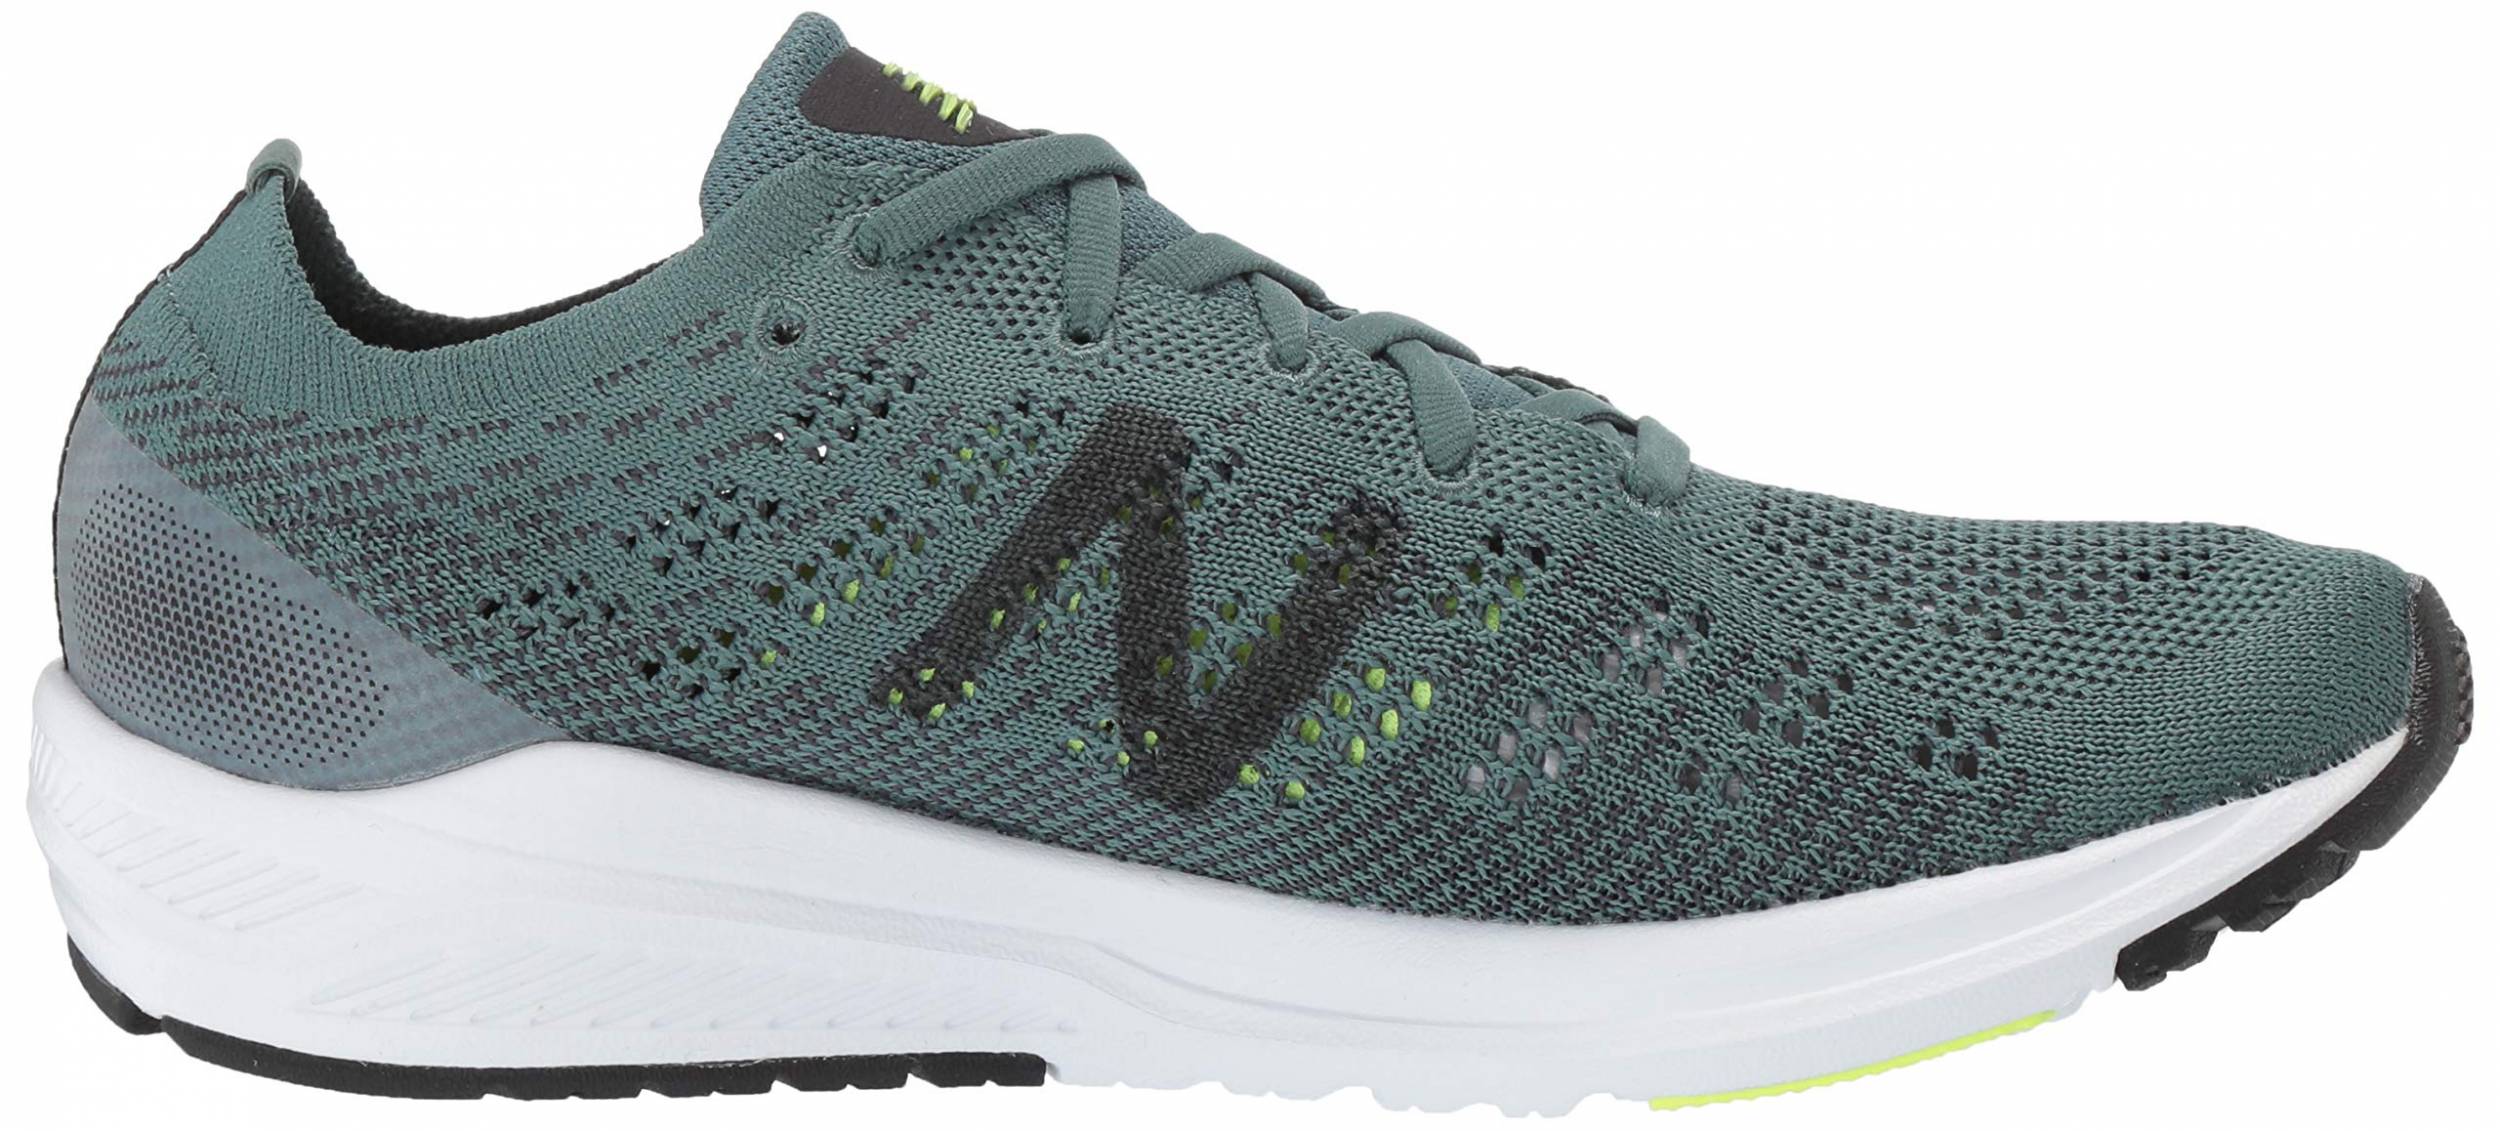 New Balance 890 v7 Review 2022, Facts, Deals | RunRepeat تيندو